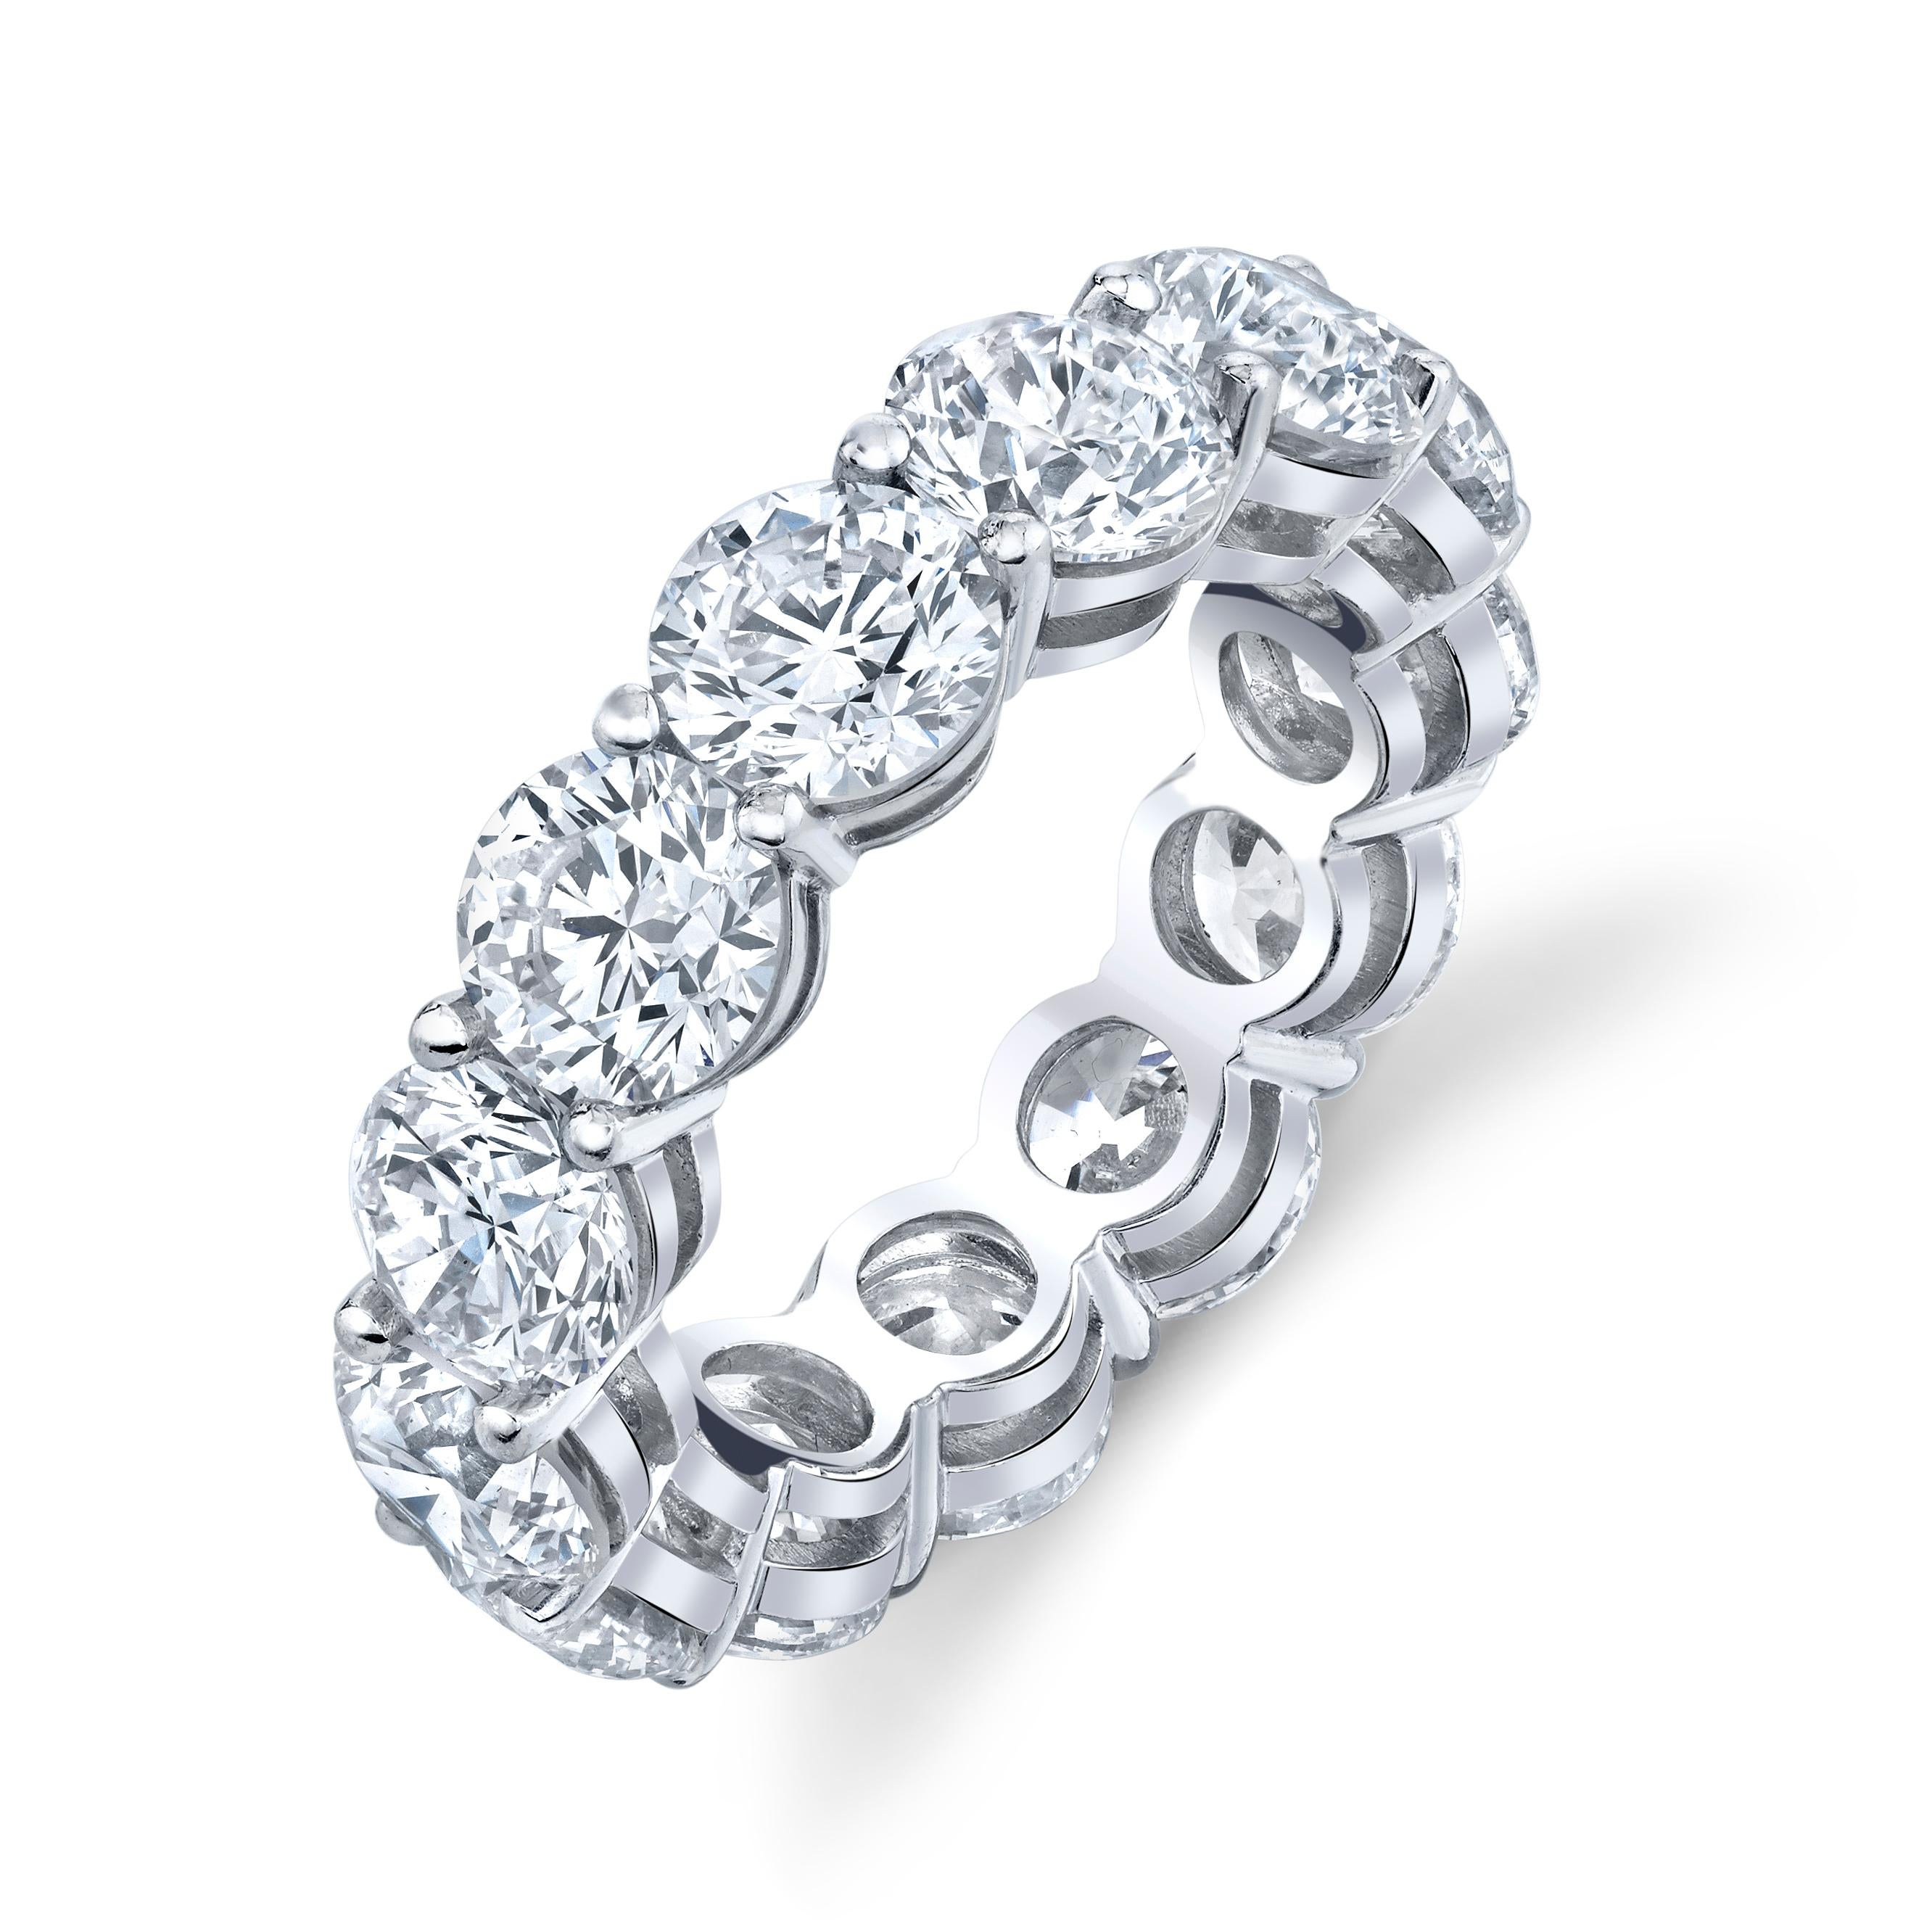 13 Round Brilliant Cut Diamonds set in platinum eternity band ring
Approximate weight per stone 0.70-0.71 ct
 9.20 carats total weight
Approximate Color H - I  Clarity VS - SI
Ring size 6.5